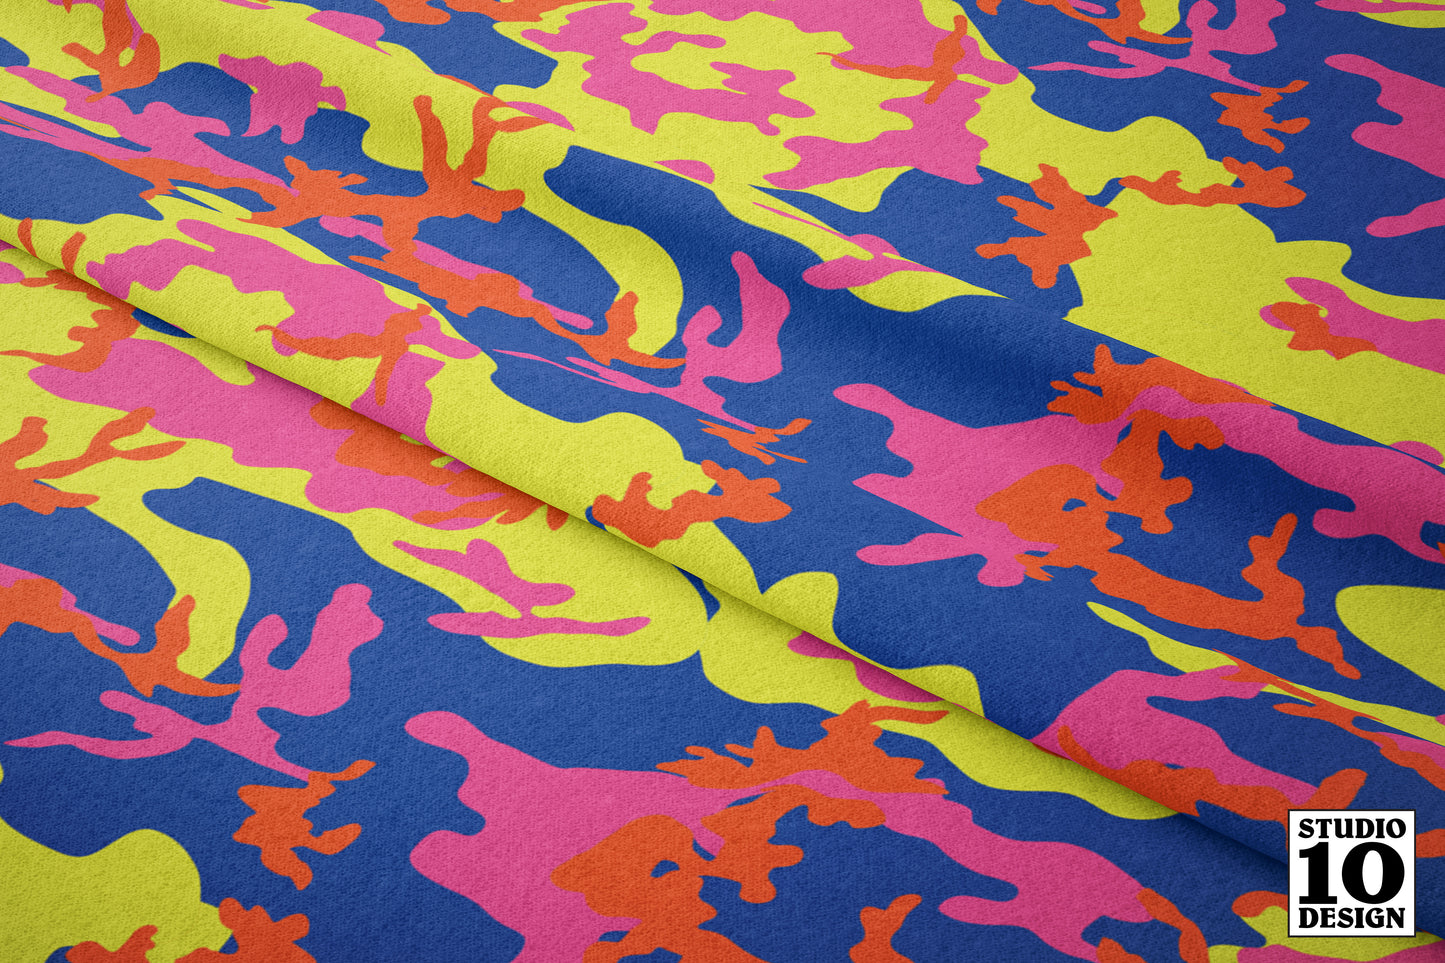 Camouflage 3 Printed Fabric by Studio Ten Design